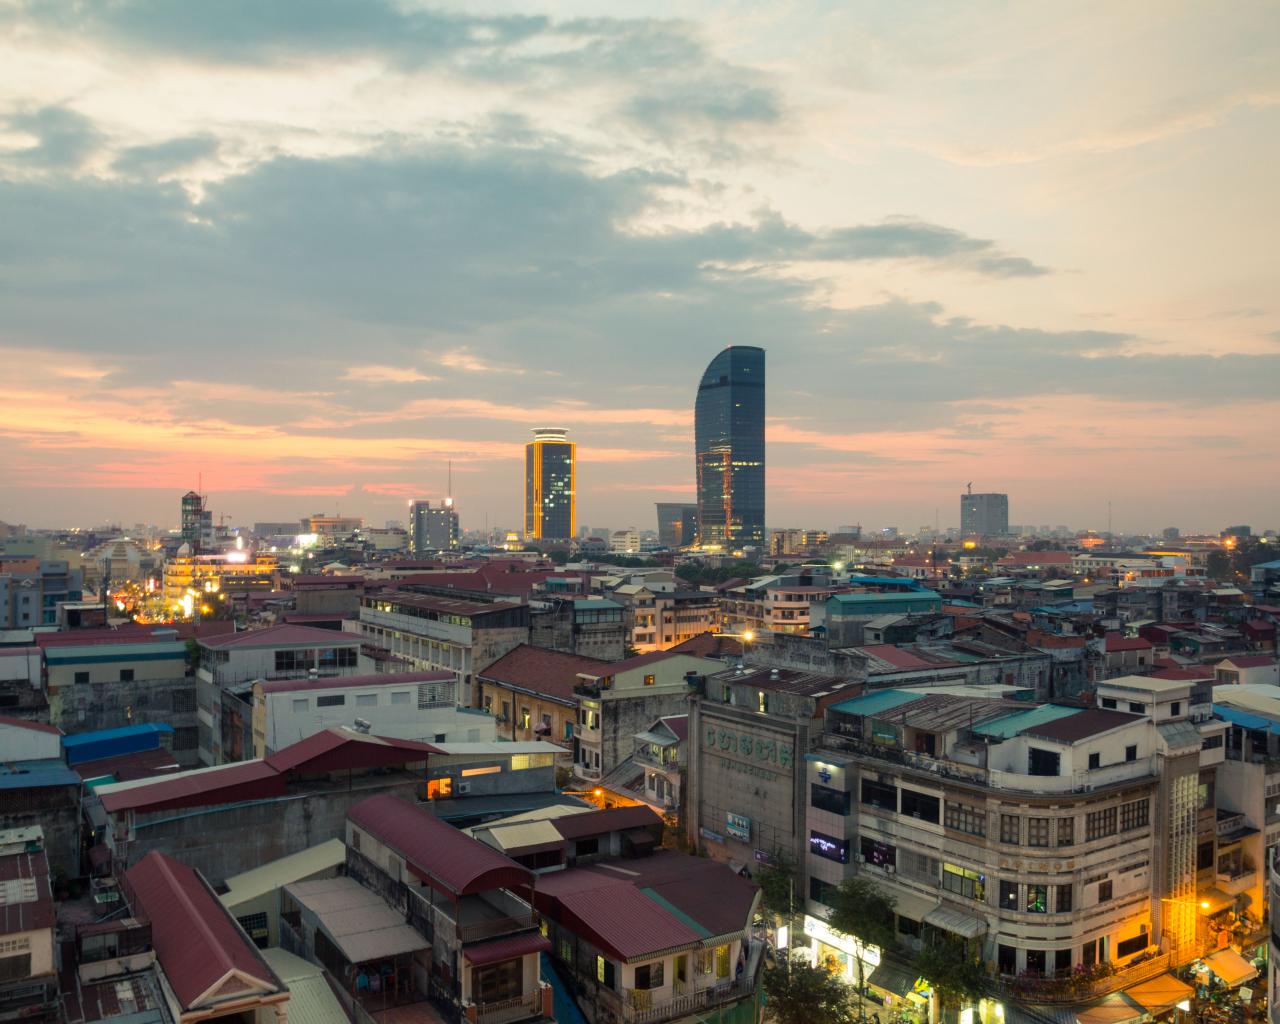 sunset in phnom penh city for Mekong and Angkor Wat holidays